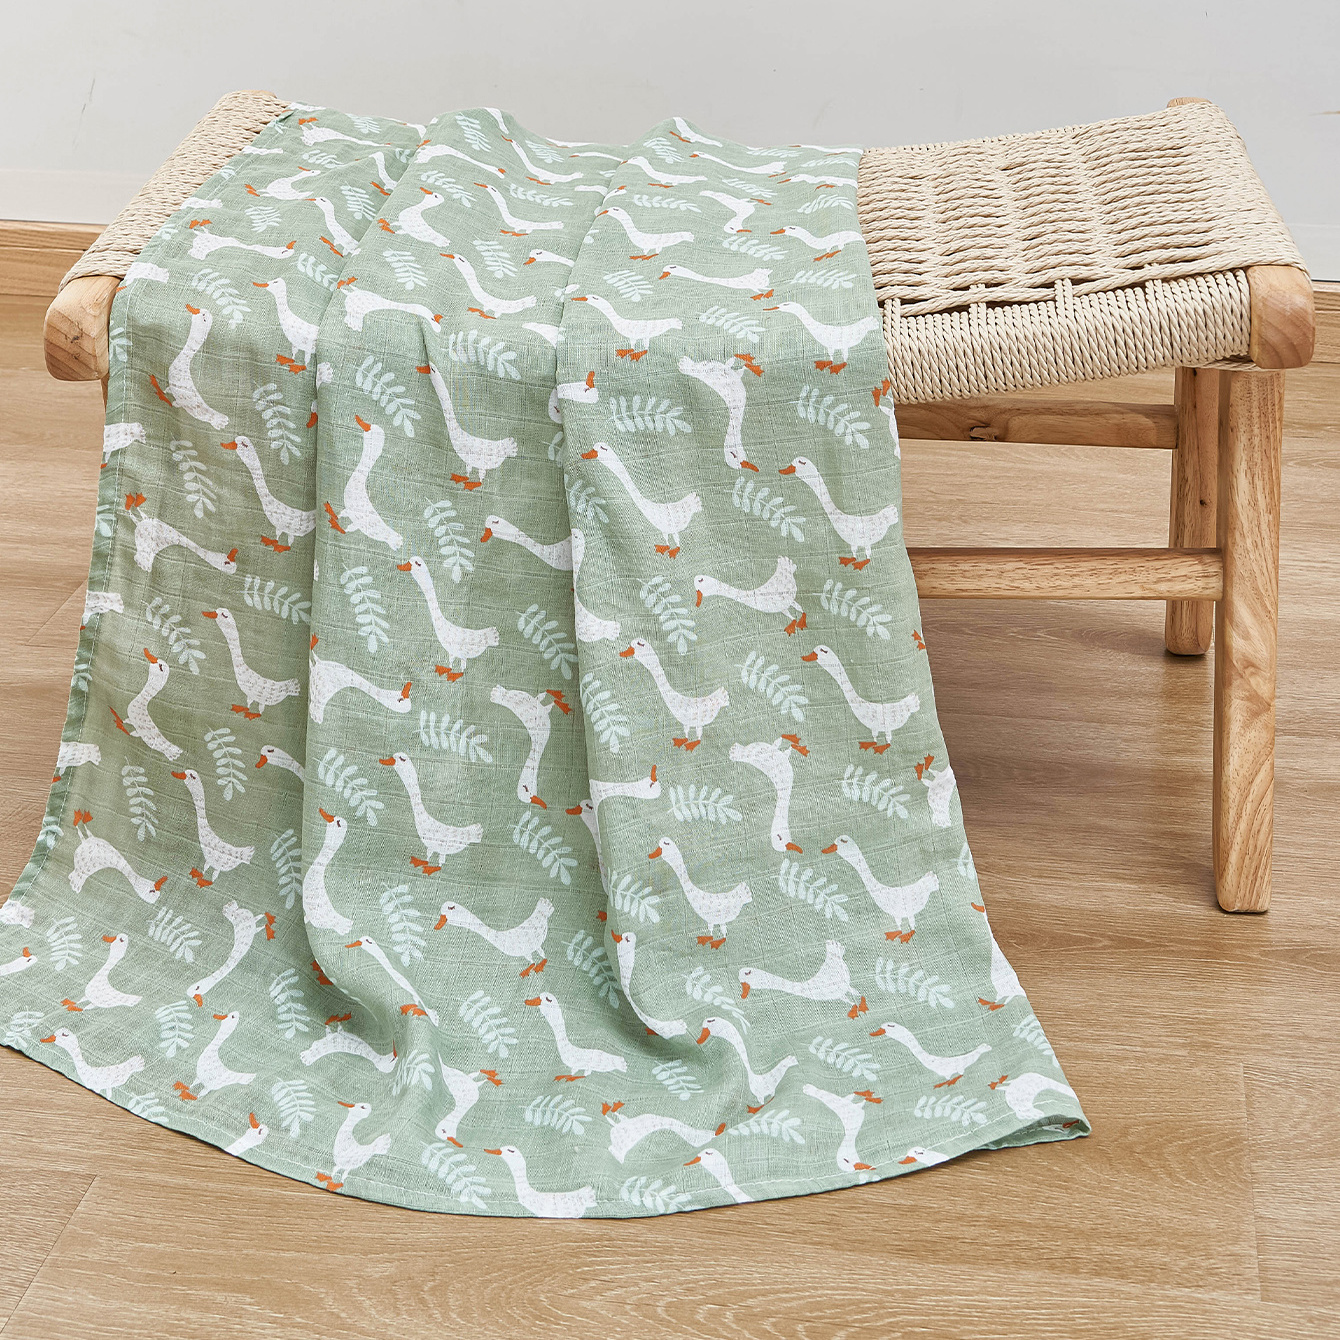 

1 Piece Of Little Duck Newborn Baby Gauze Swaddle Blanket, Suitable For Use As A Baby Wrap, Bath Towel, And Swaddle Blanket.